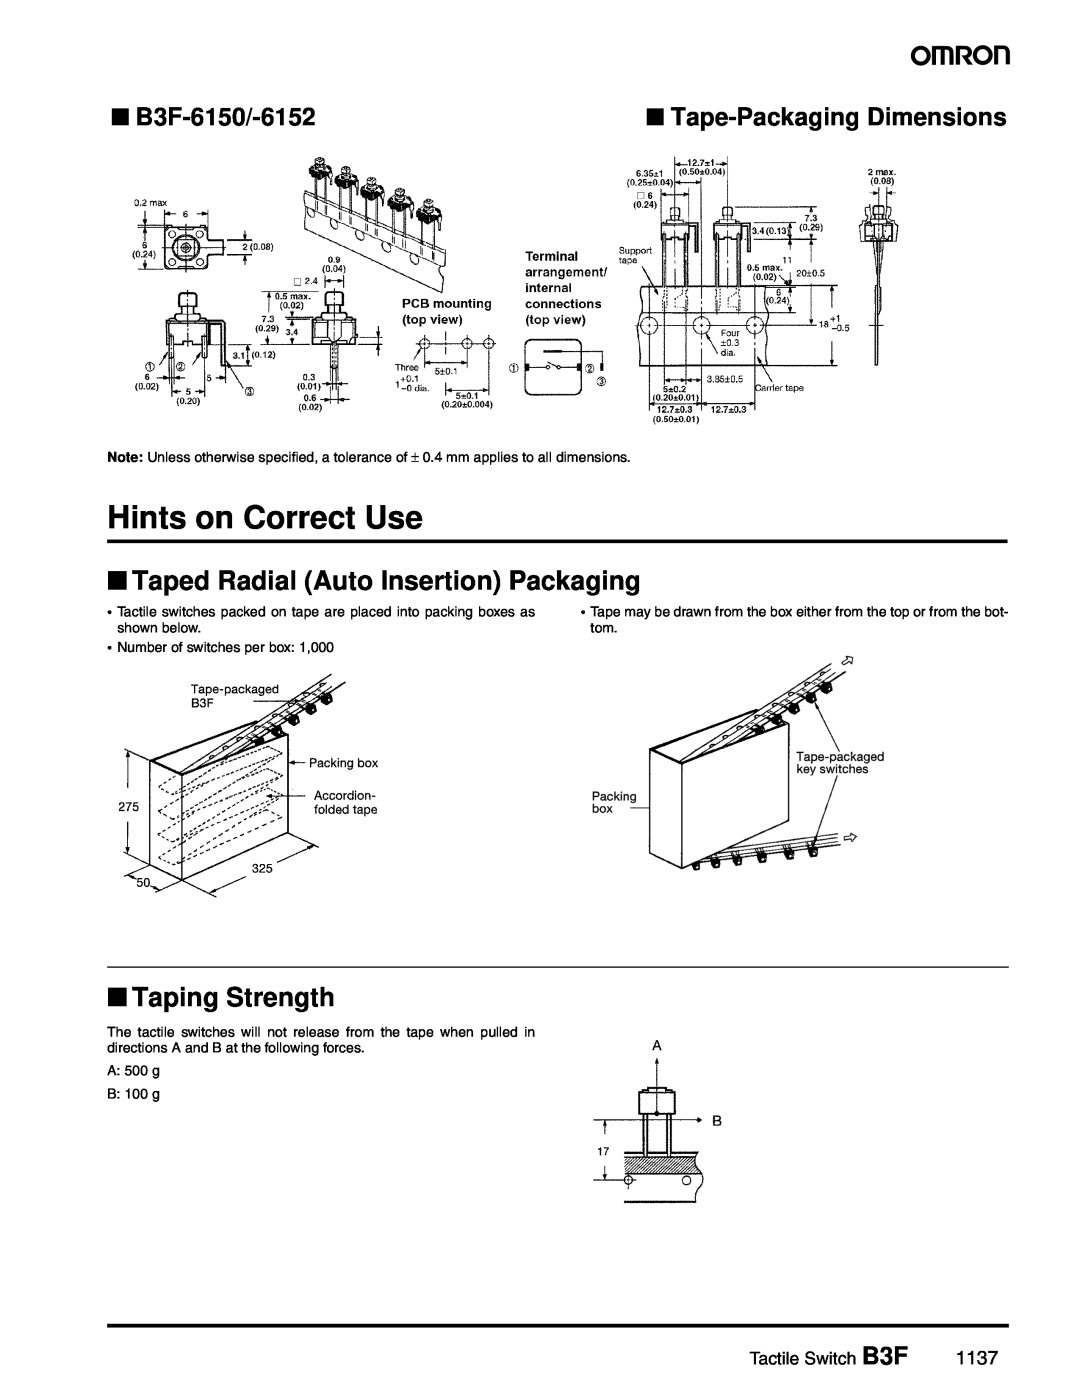 Omron manual Hints on Correct Use, Taped Radial Auto Insertion Packaging, Taping Strength, B3F-6150/-6152, 1137 